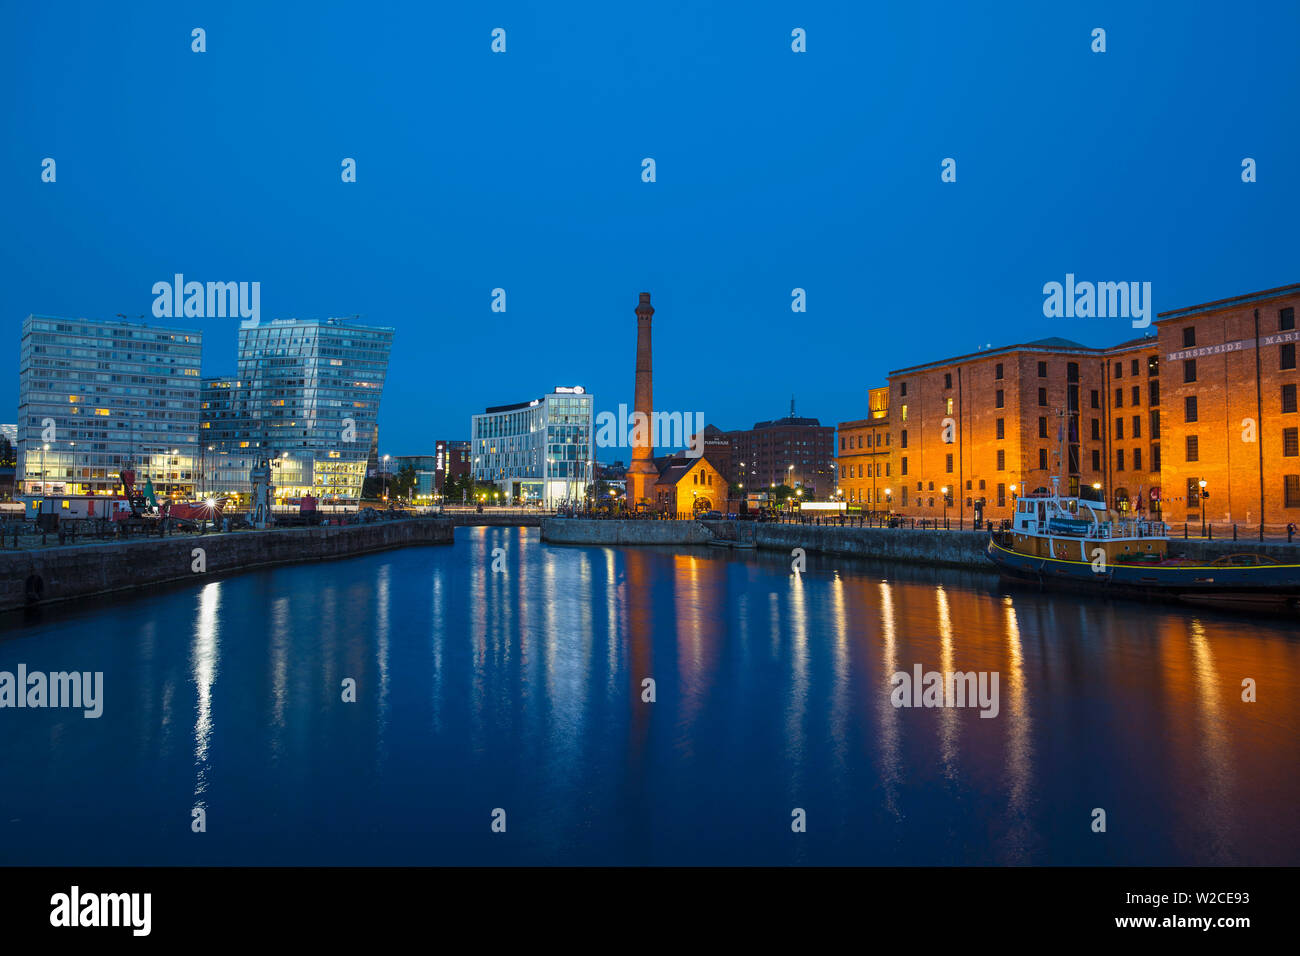 United Kingdom, England, Merseyside, Liverpool, Canning Dock, View of docks looking towards the Pump House and Hilton Hotel Stock Photo